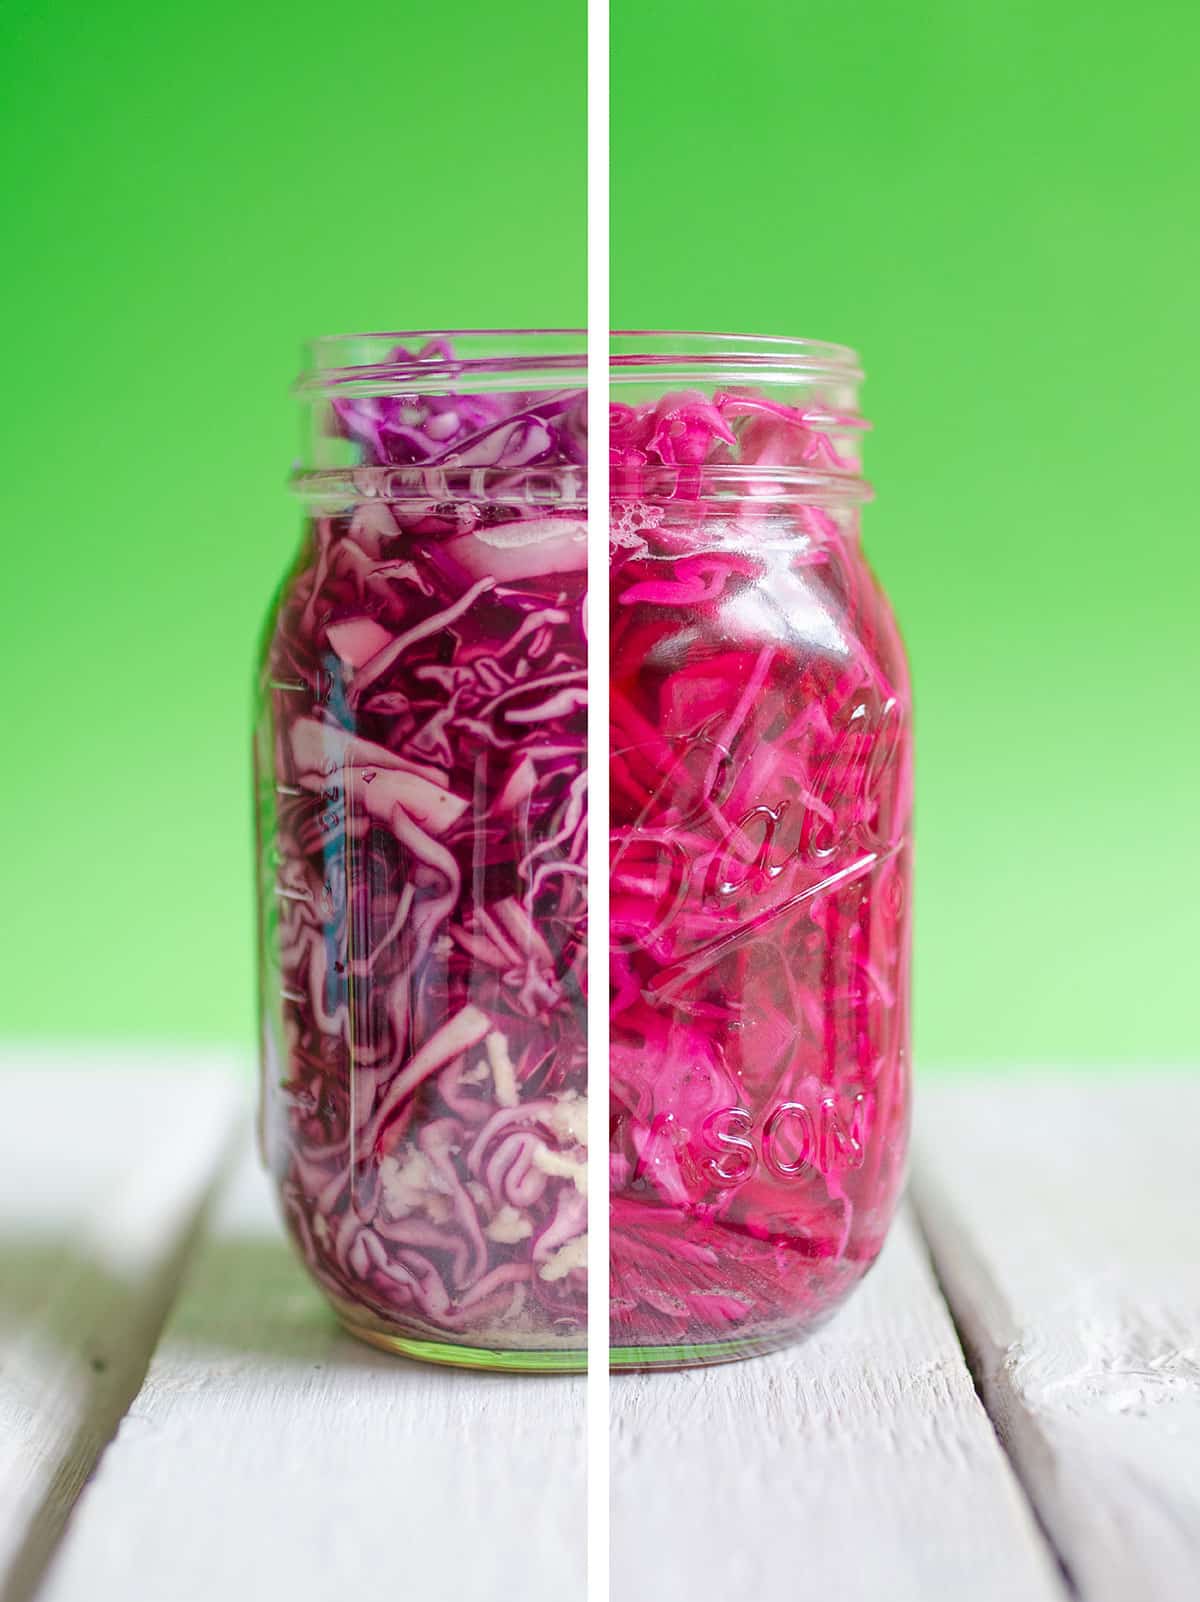 Pickled red cabbage in a glass jar with a green background.